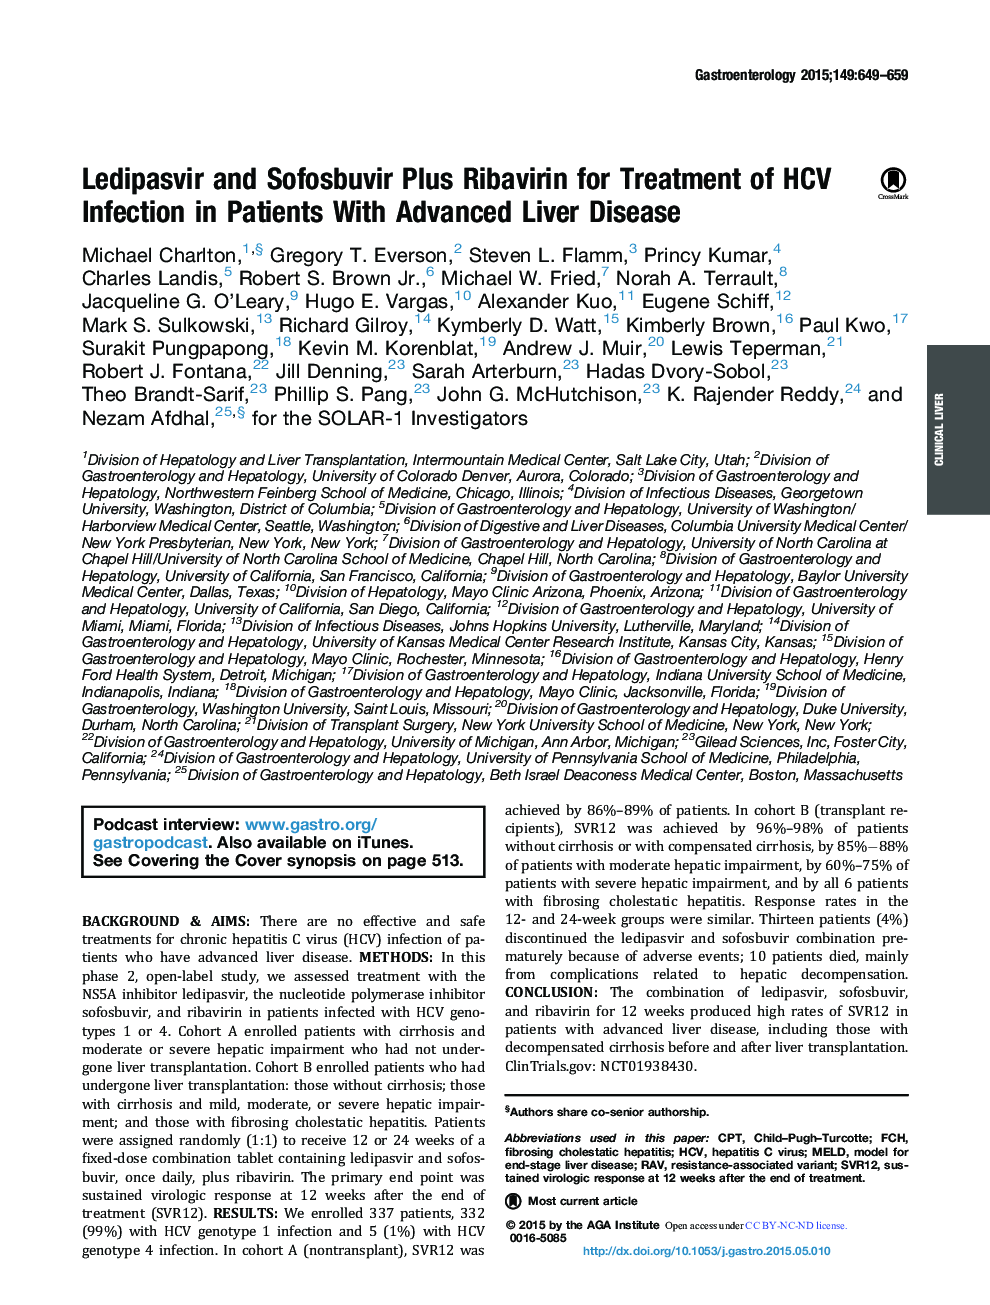 Original ResearchFull Report: Clinical-LiverLedipasvir and Sofosbuvir Plus Ribavirin for Treatment of HCV Infection in Patients With Advanced Liver Disease